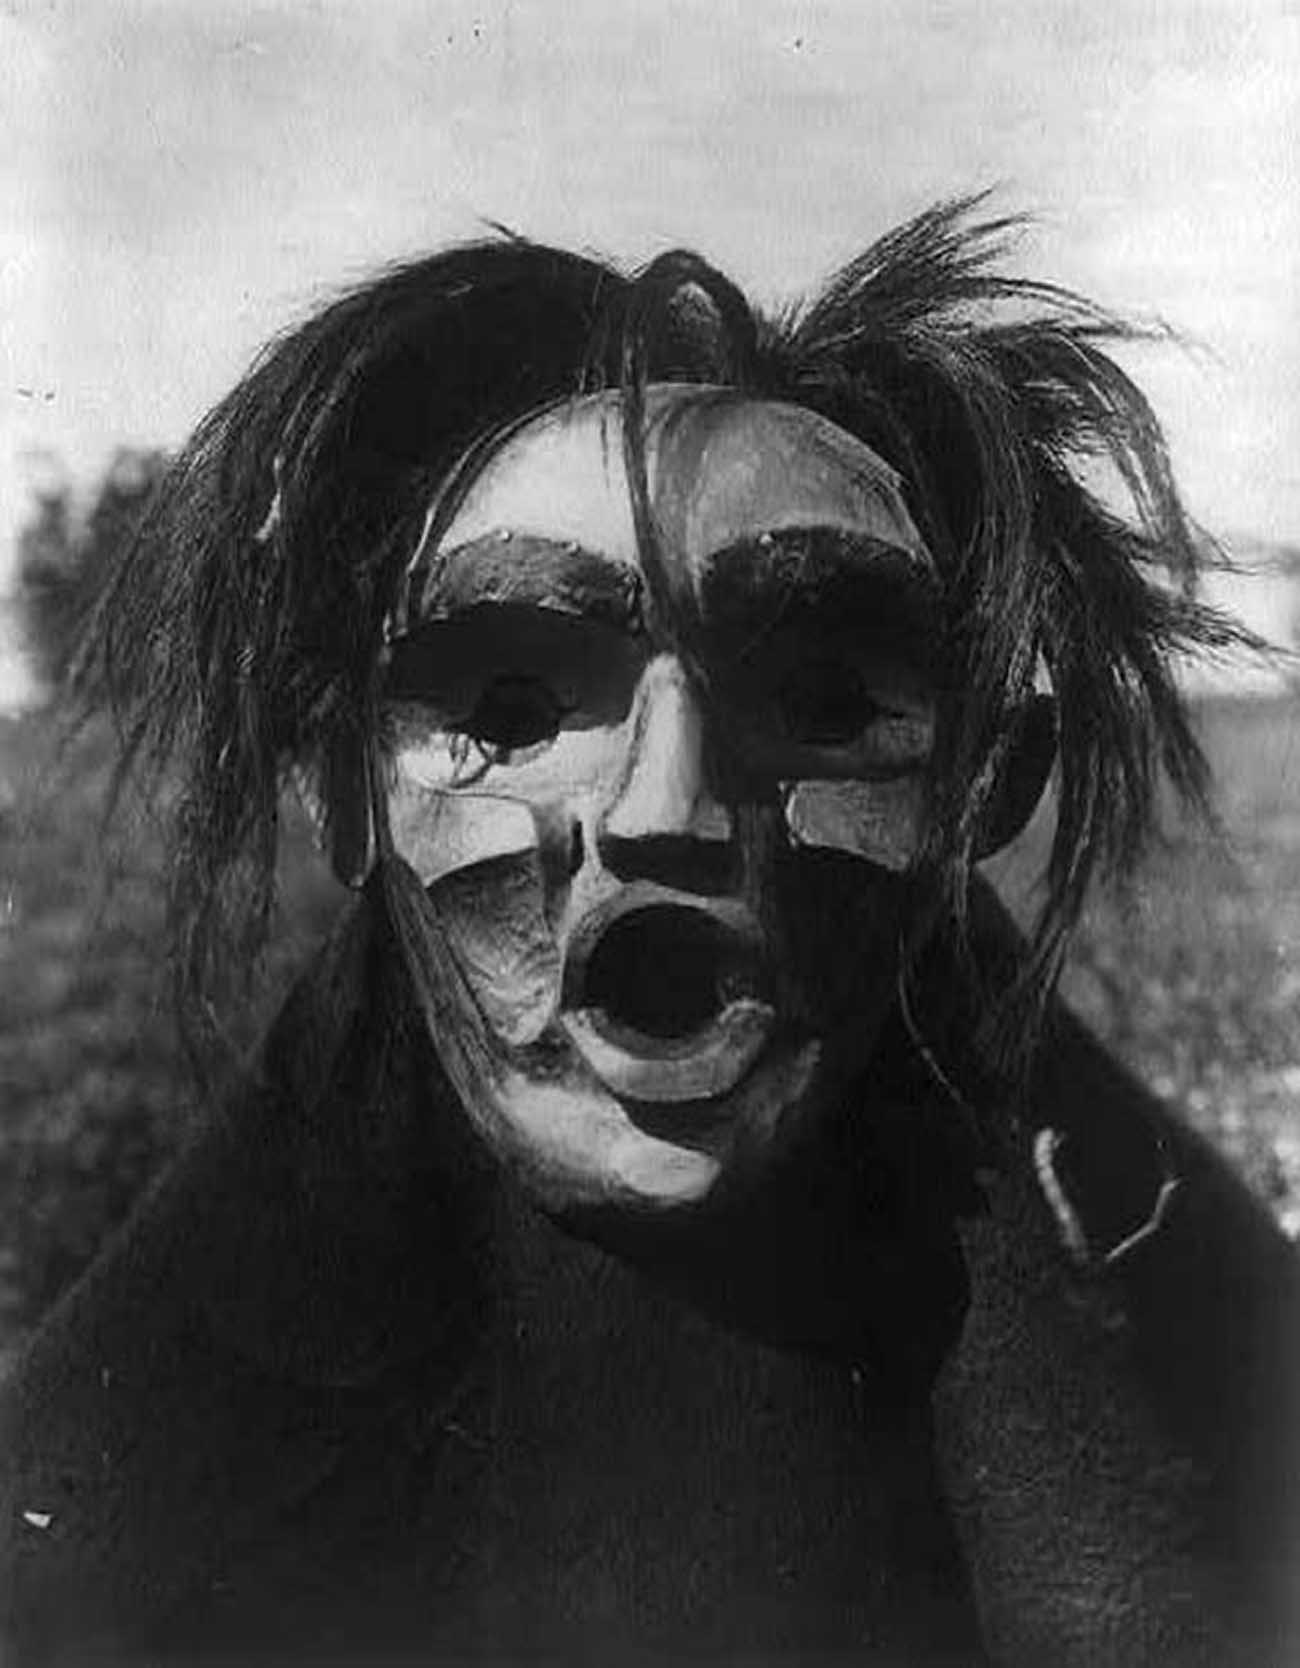 Person wearing Mask of Tsunukwalahl, a mythical being, used during the Winter Dance.